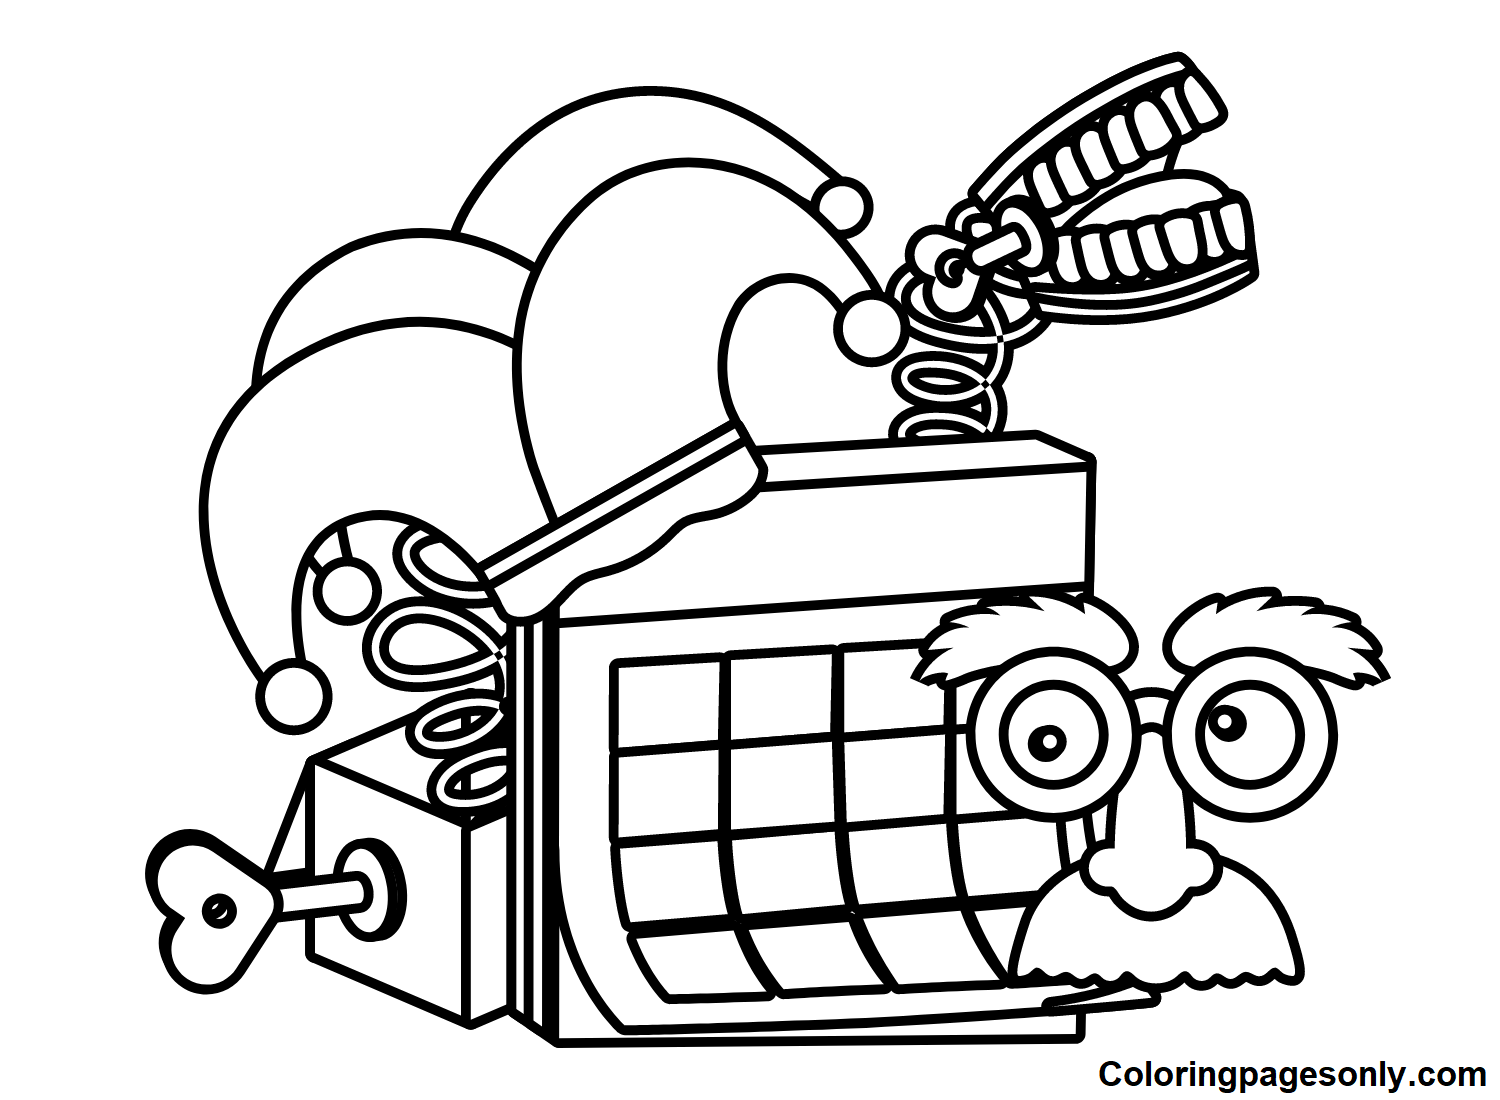 Print April Fools’ Day Coloring Pages